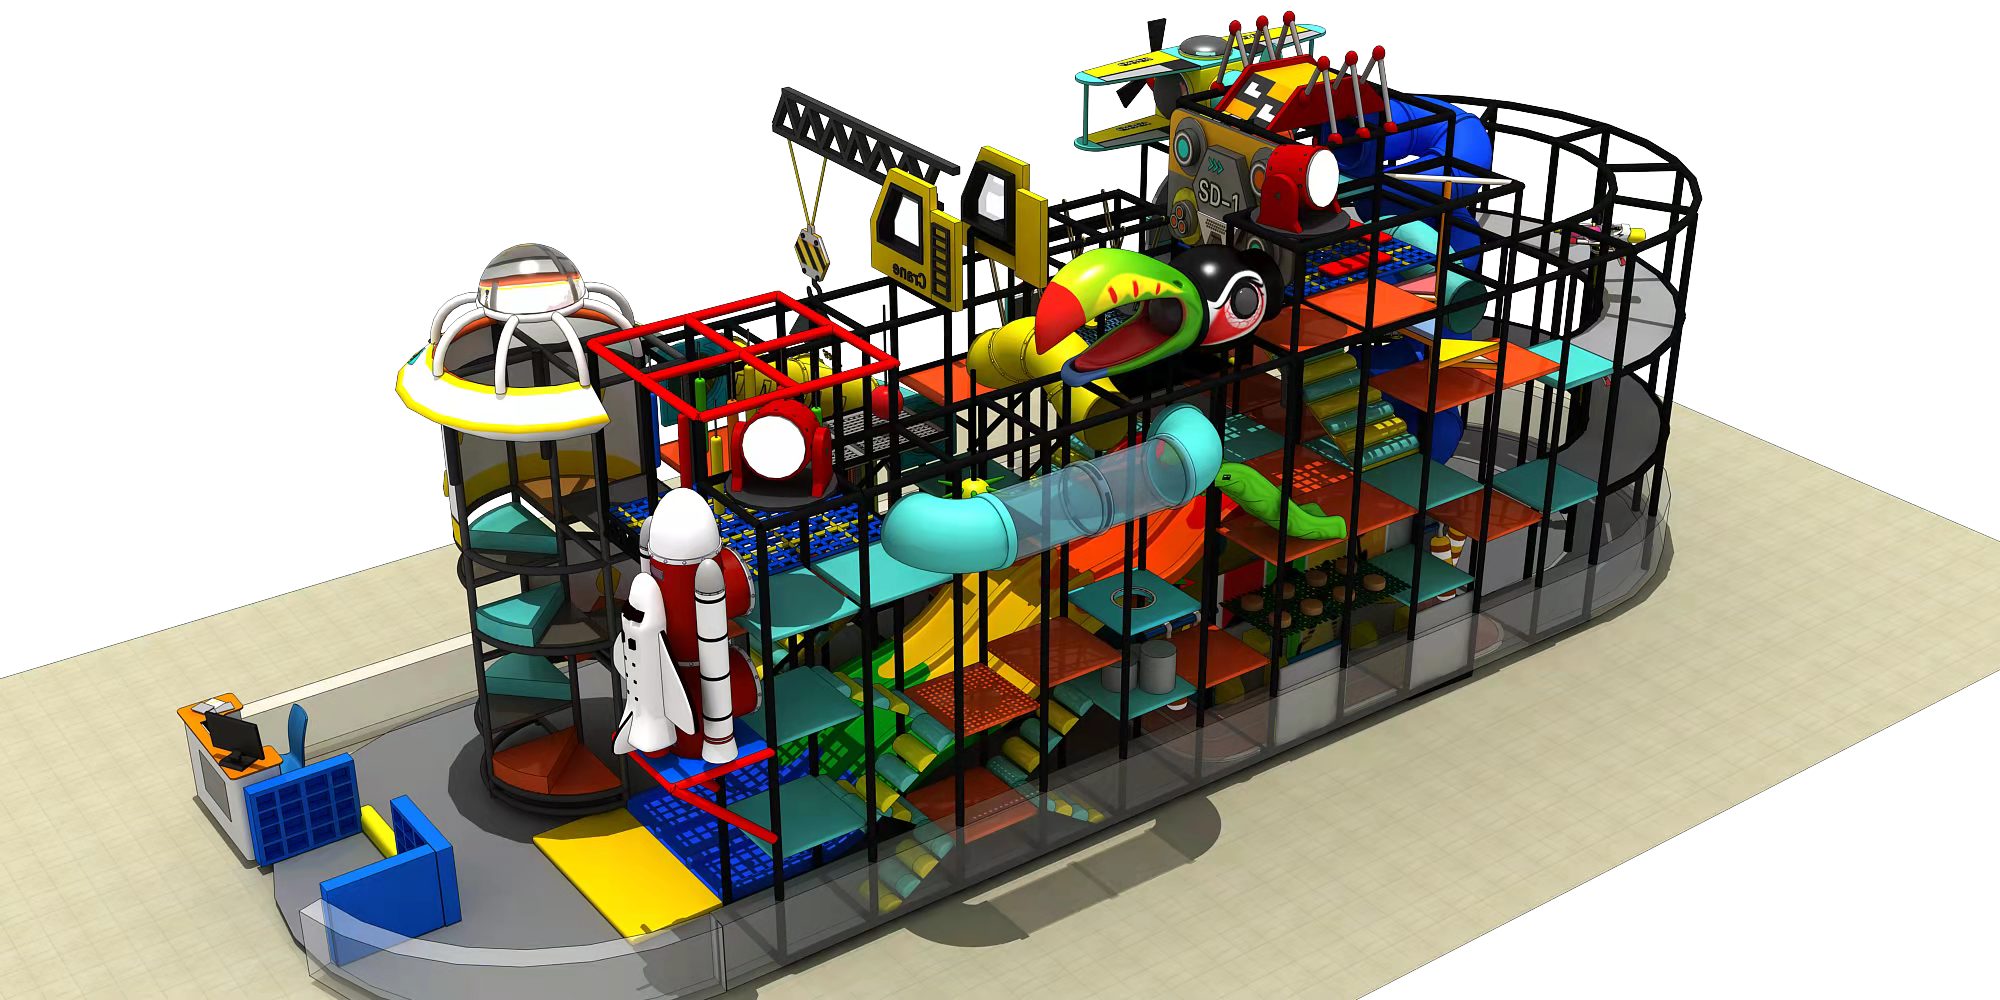 How To Source indoor play equipment Directly from Chinese Manufacturers on toymakerinchina.com